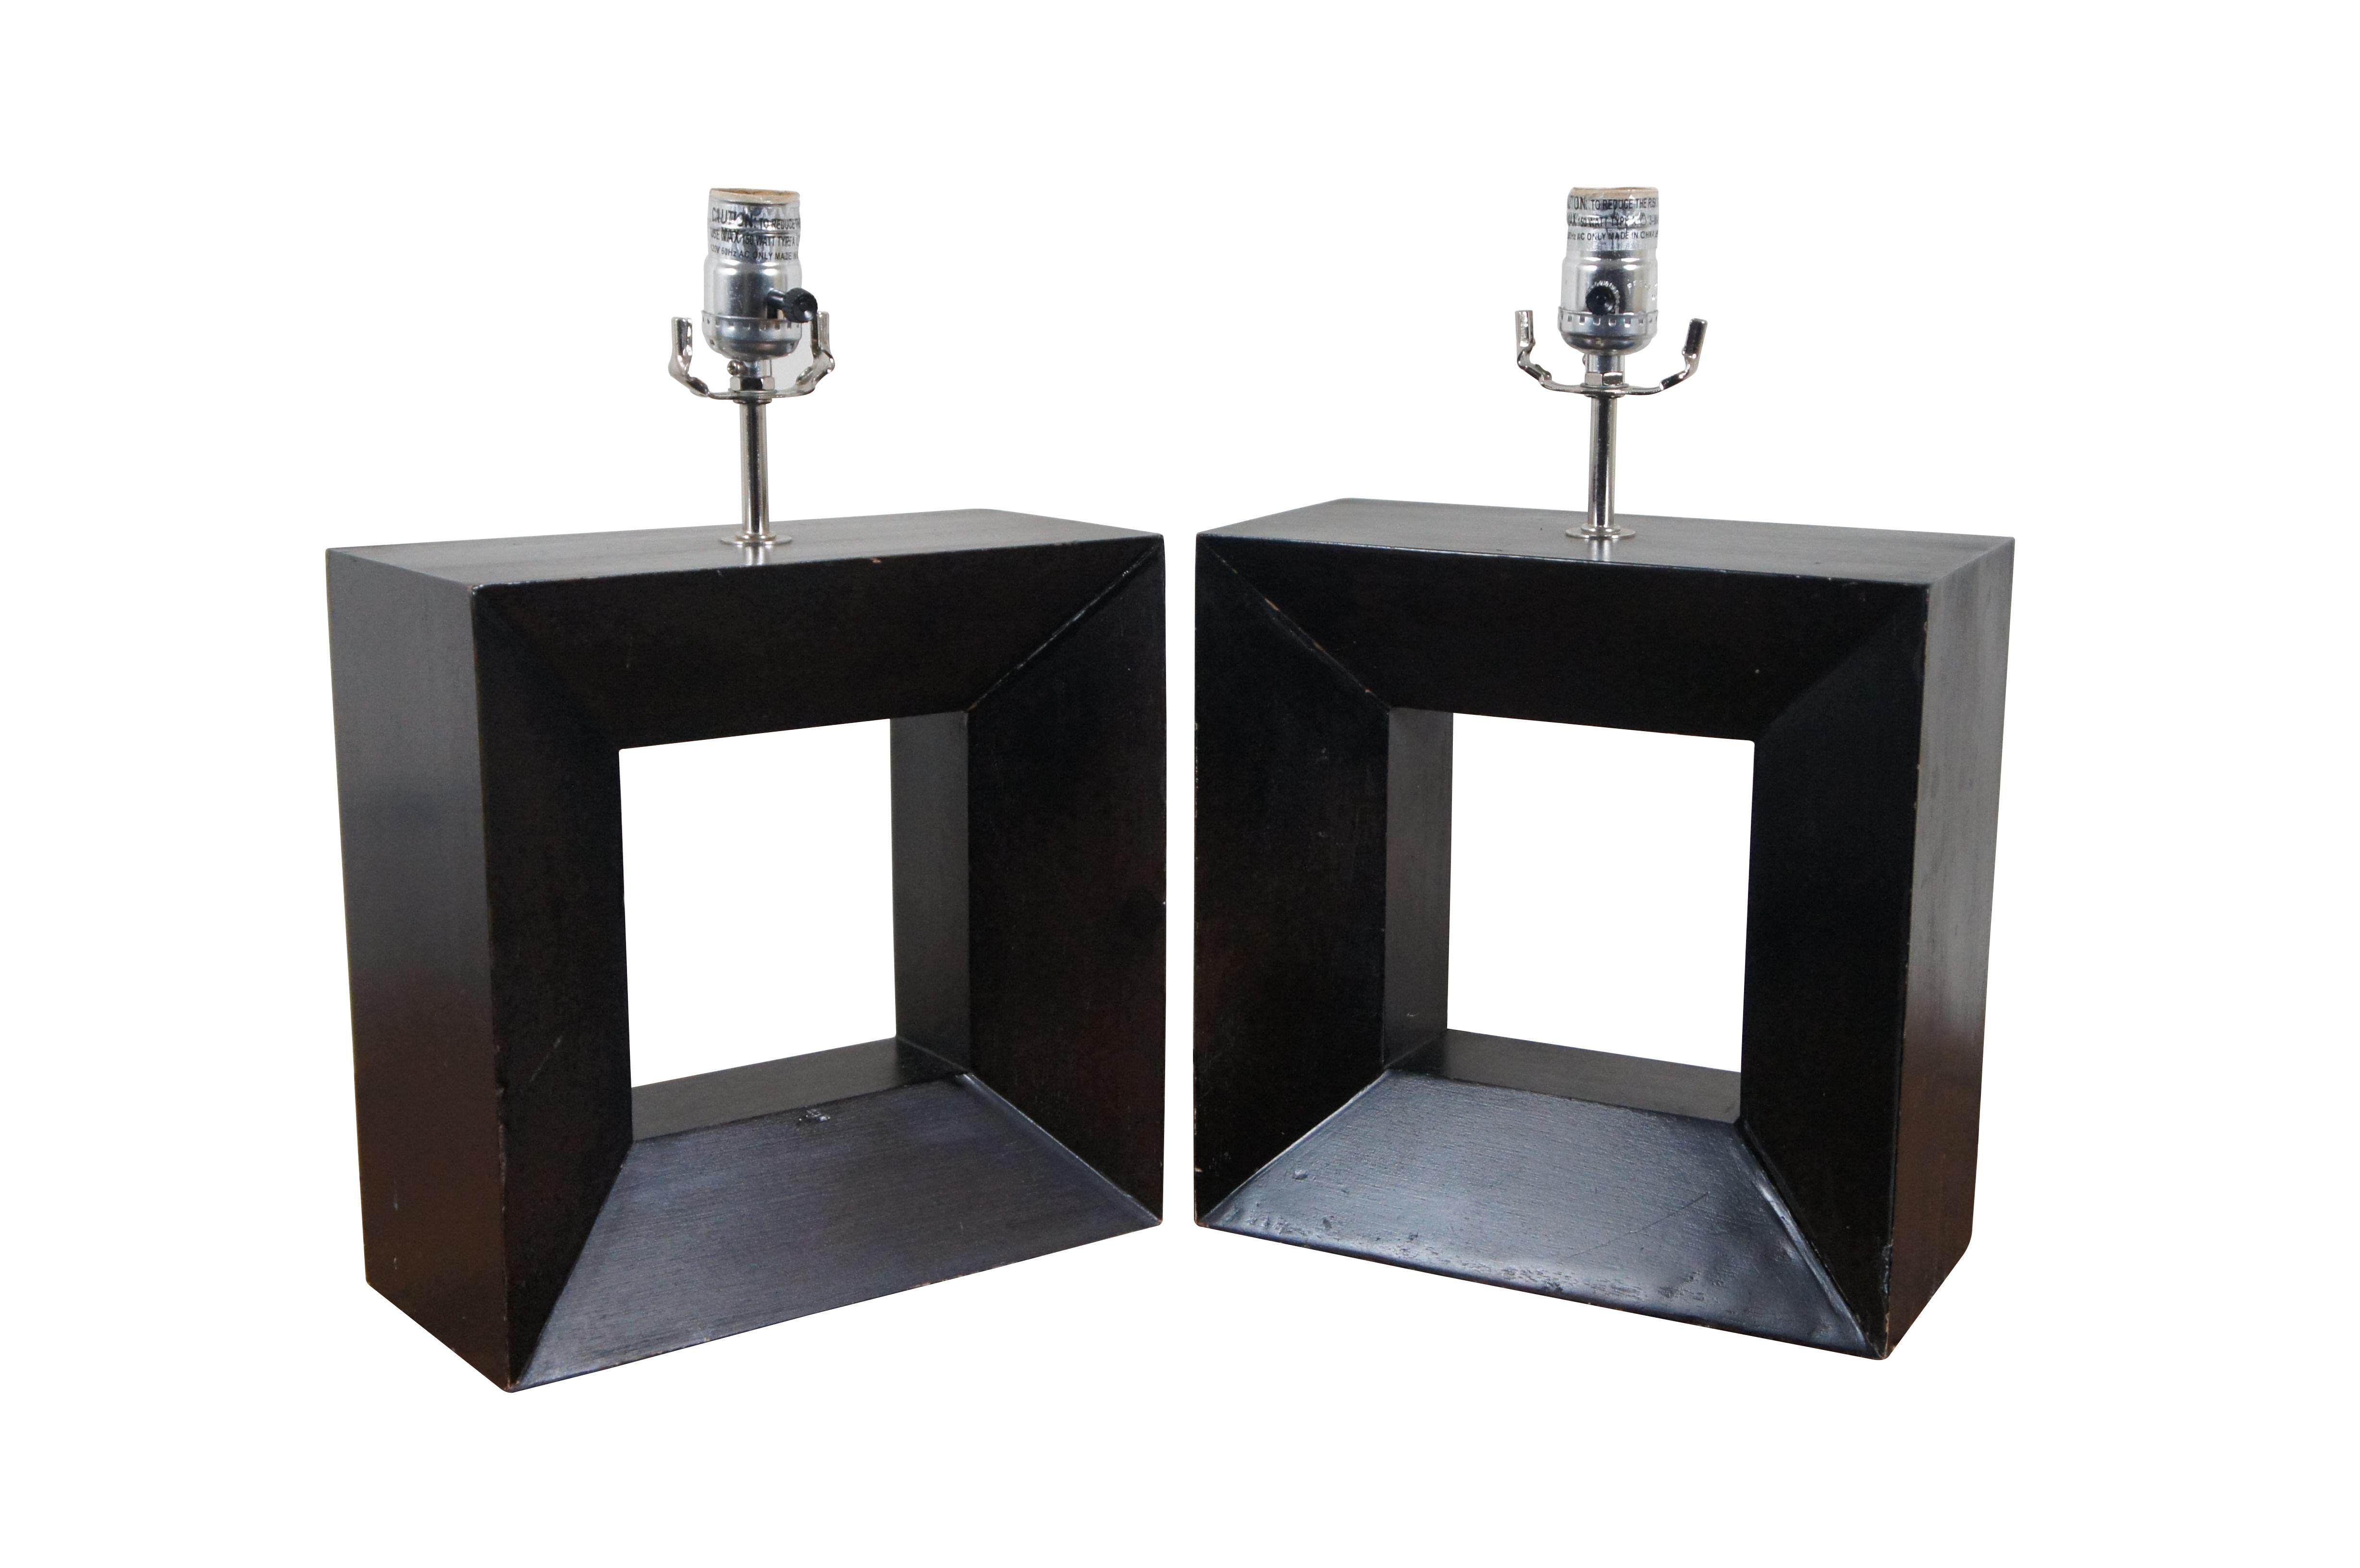 Pair of mid century modern wooden table lamps featuring square beveled forms with cut out centers, with a deep, ebonized finish. No harps.

Dimensions:
10.75